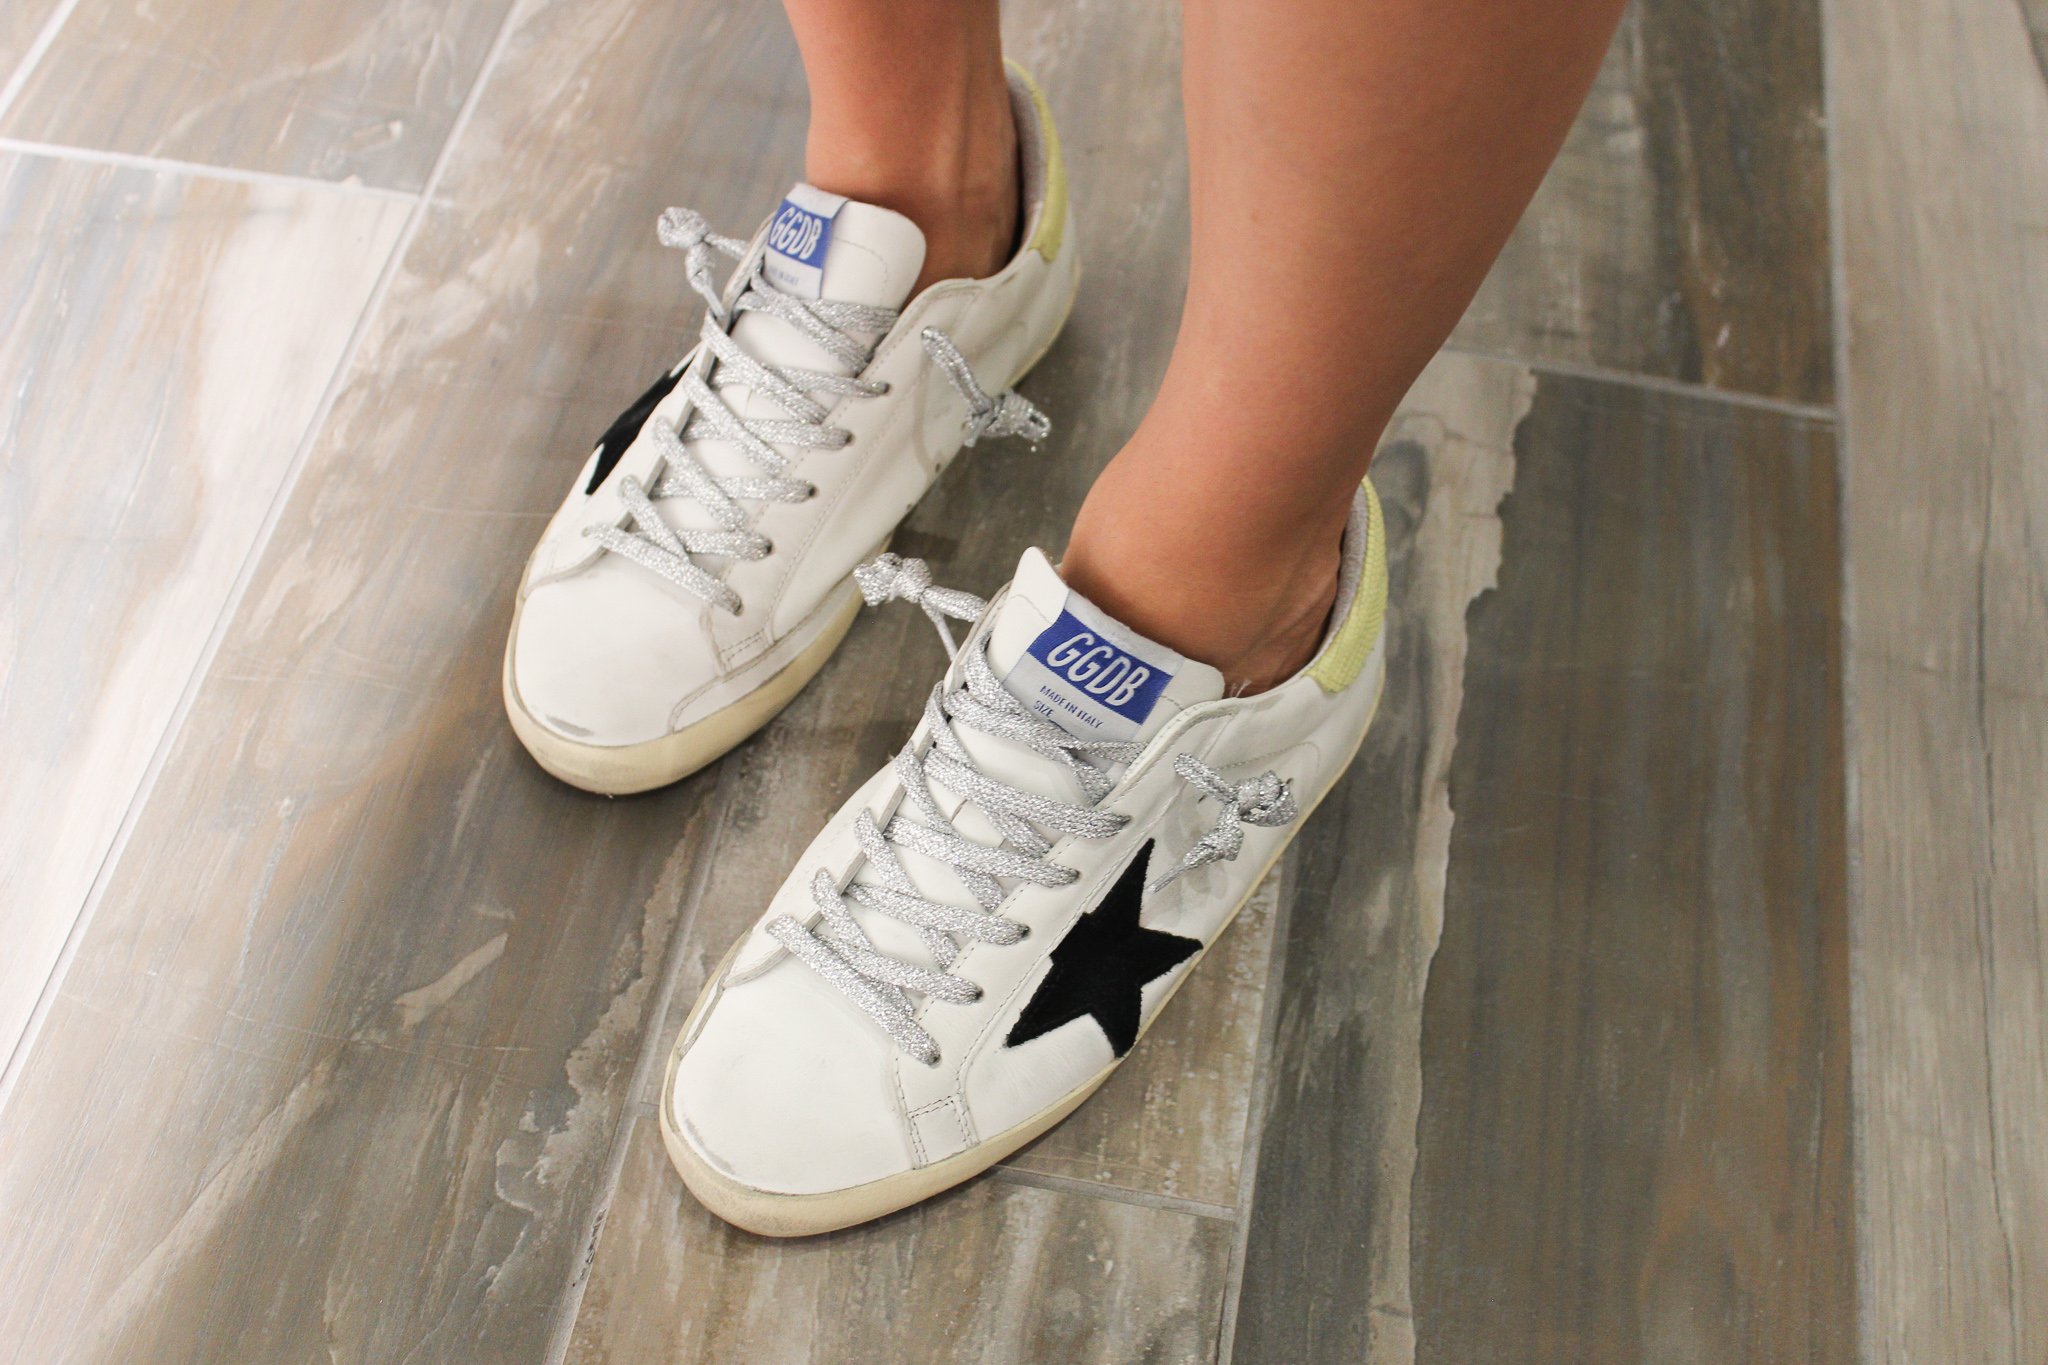 Denver High-End Boutique - A Line Boutique - Personal Styling Golden Goose Sneakers